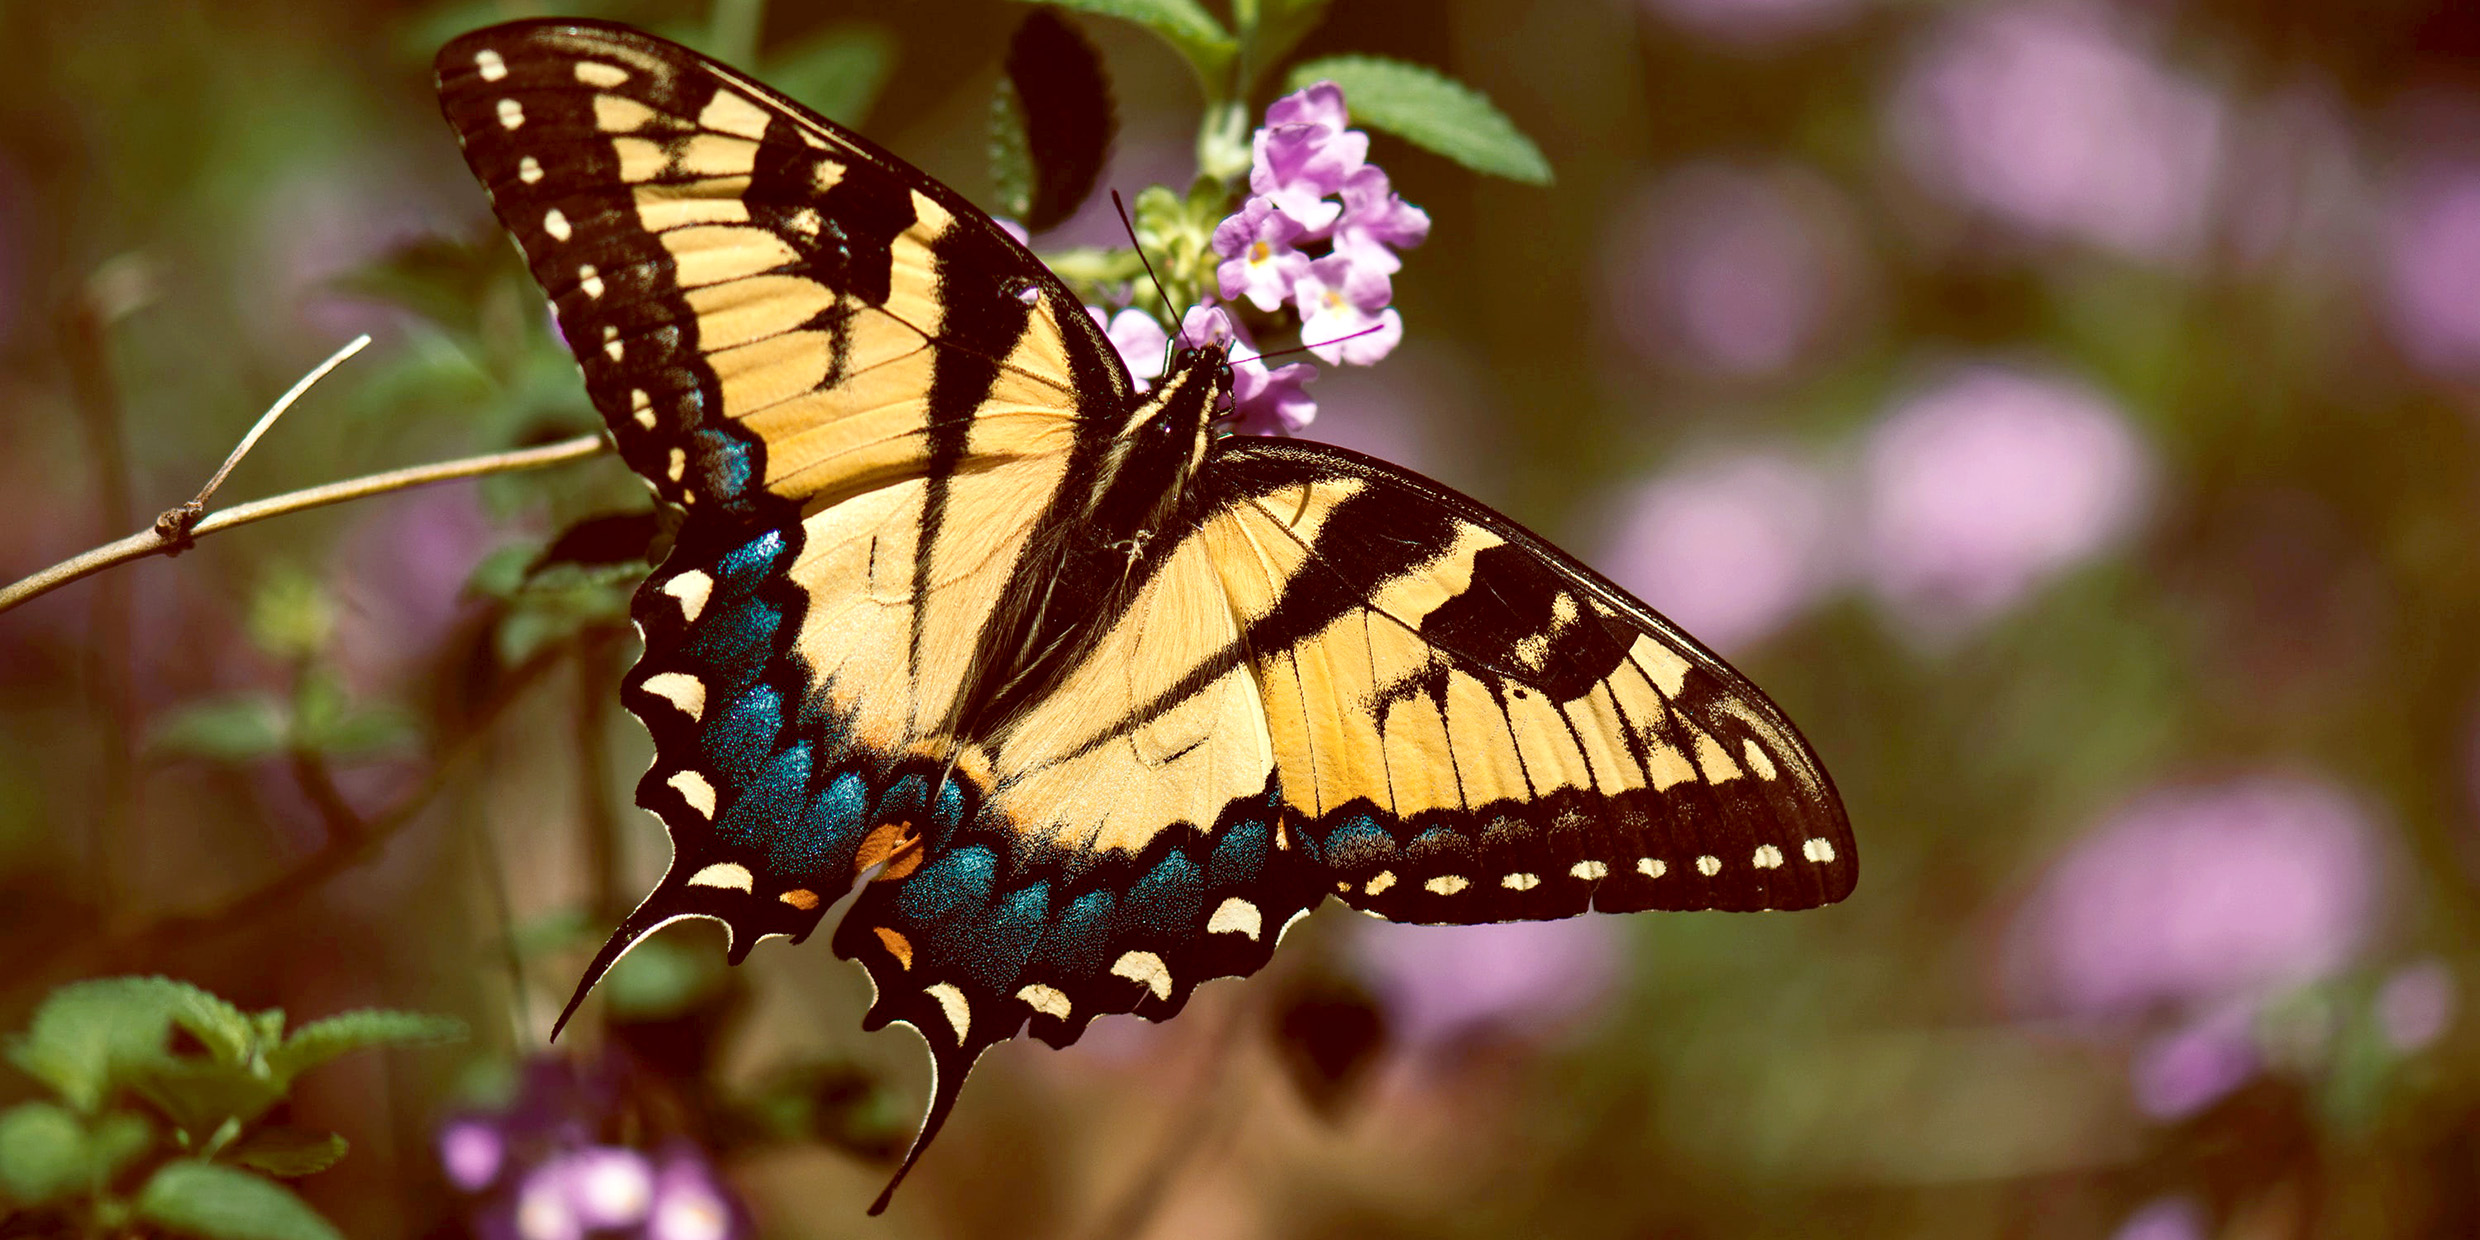 Image of yellow and black-striped butterfly